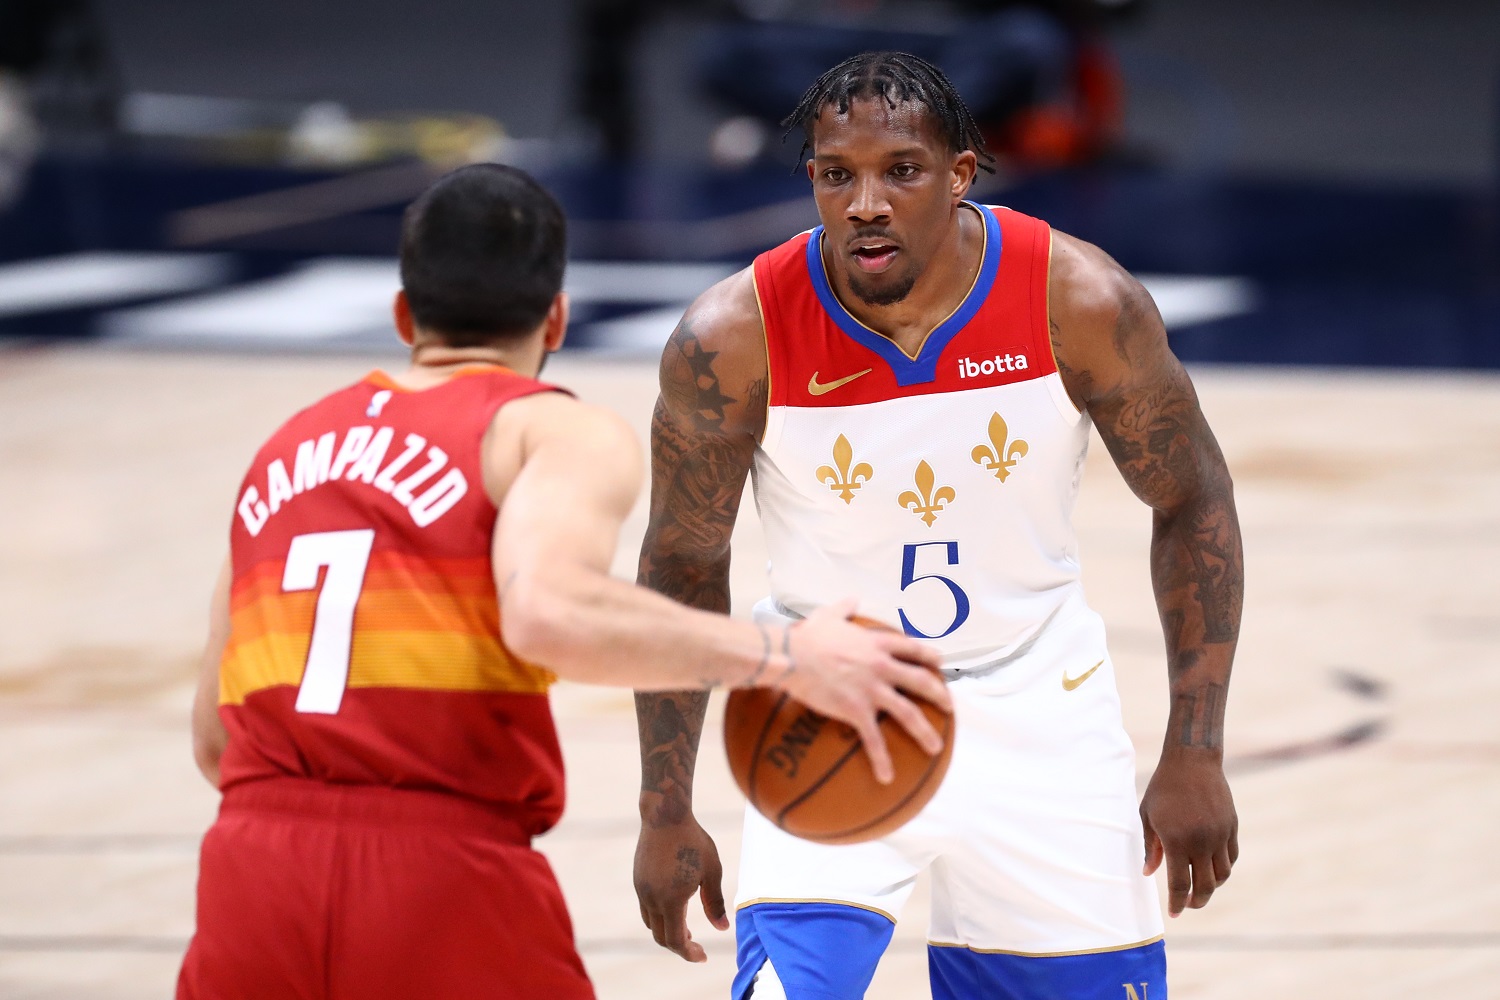 Eric Bledsoe of the New Orleans Pelicans defends Facundo Campazzo of the Denver Nuggets on April 28, 2021, in Denver.